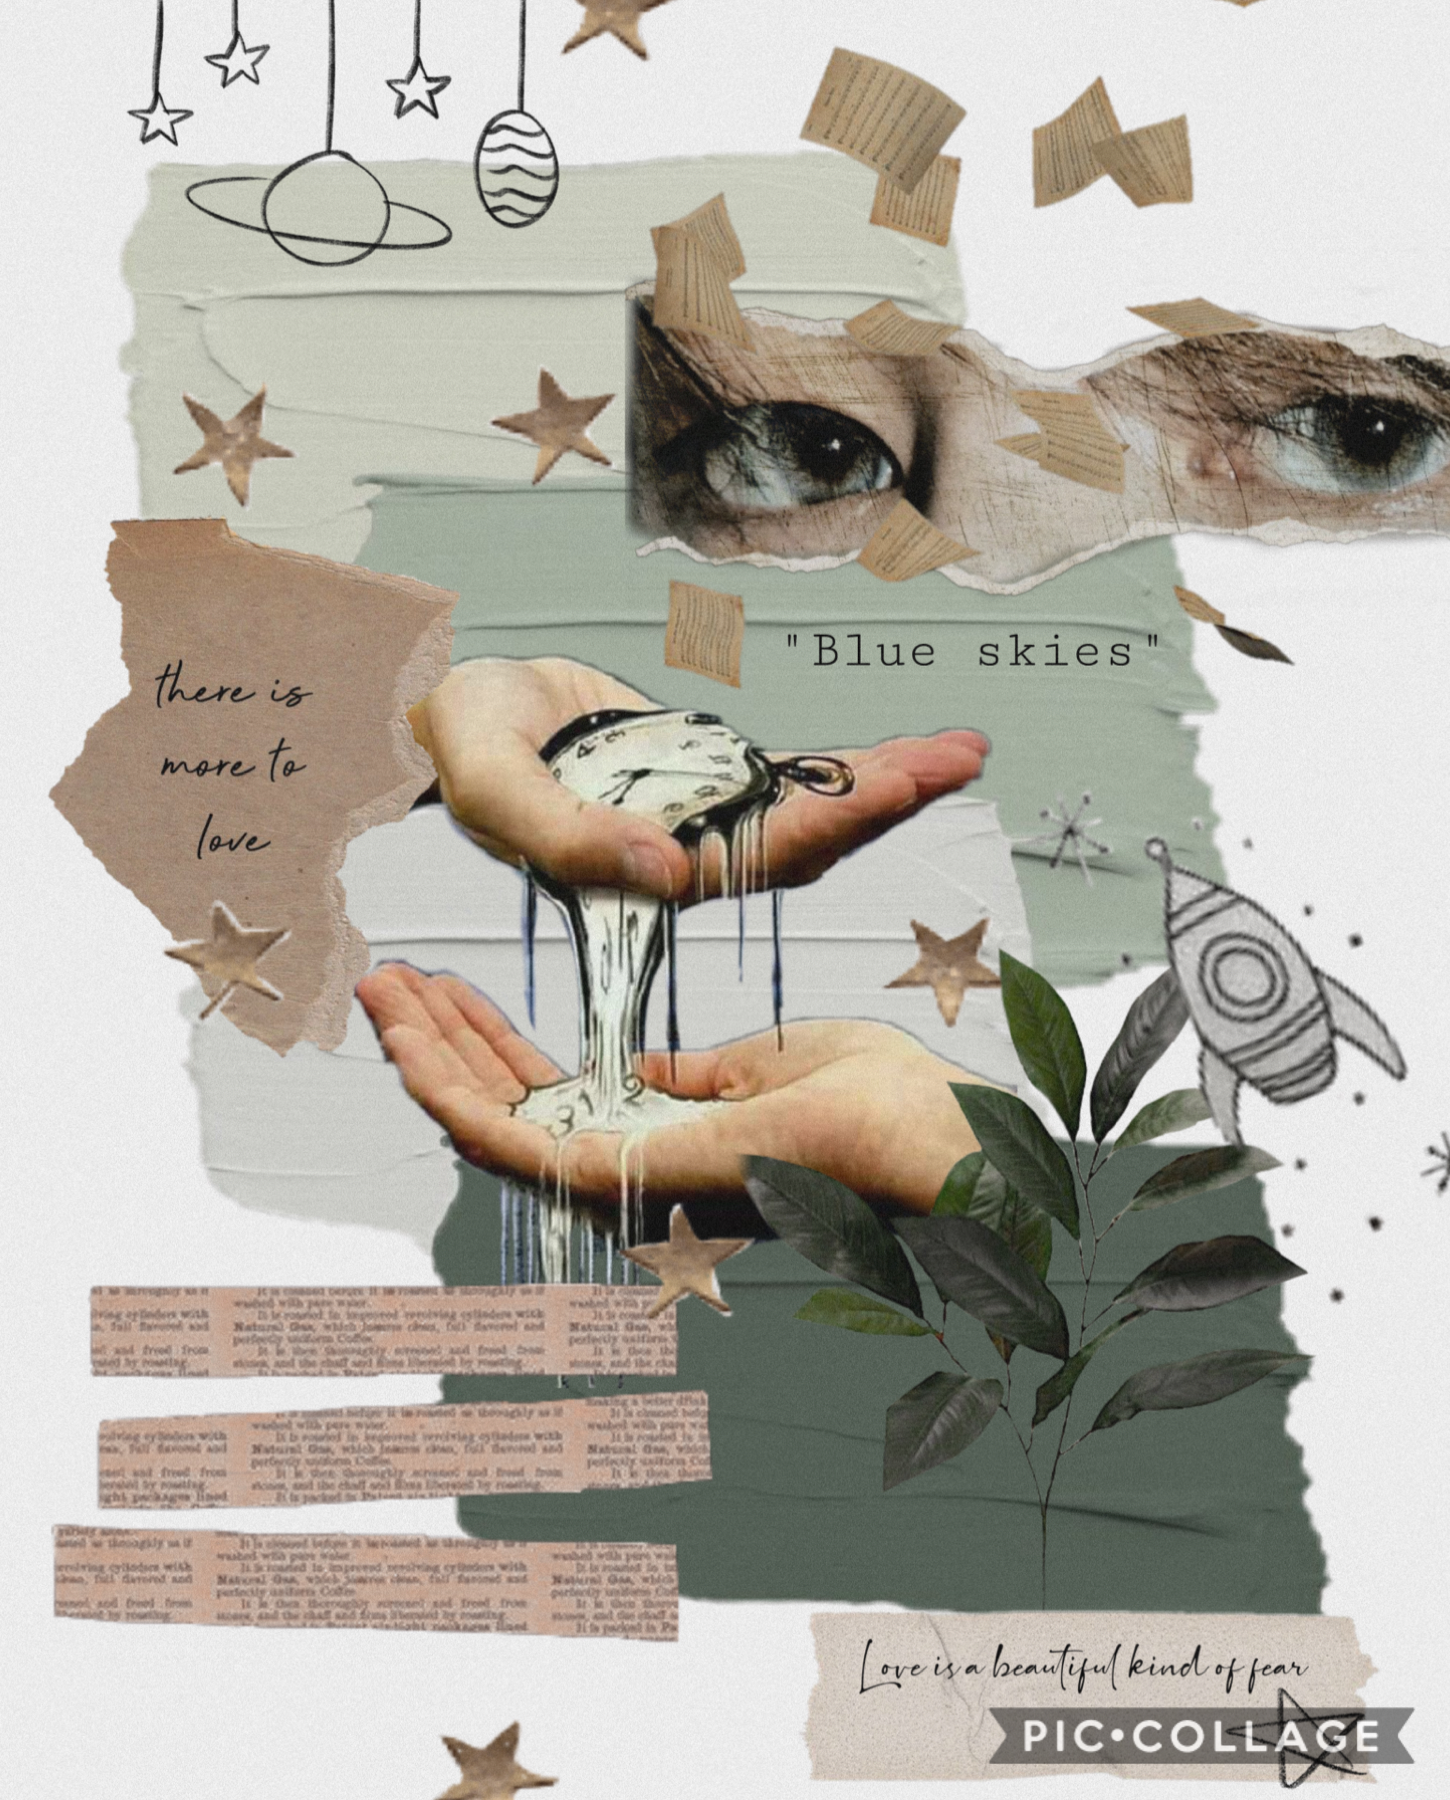 Starting a new thing (click)
I am making collages while listening to songs that I love and just creating what I see or feel. This is for the song blue skies which is a very special song to me (continued in comments)